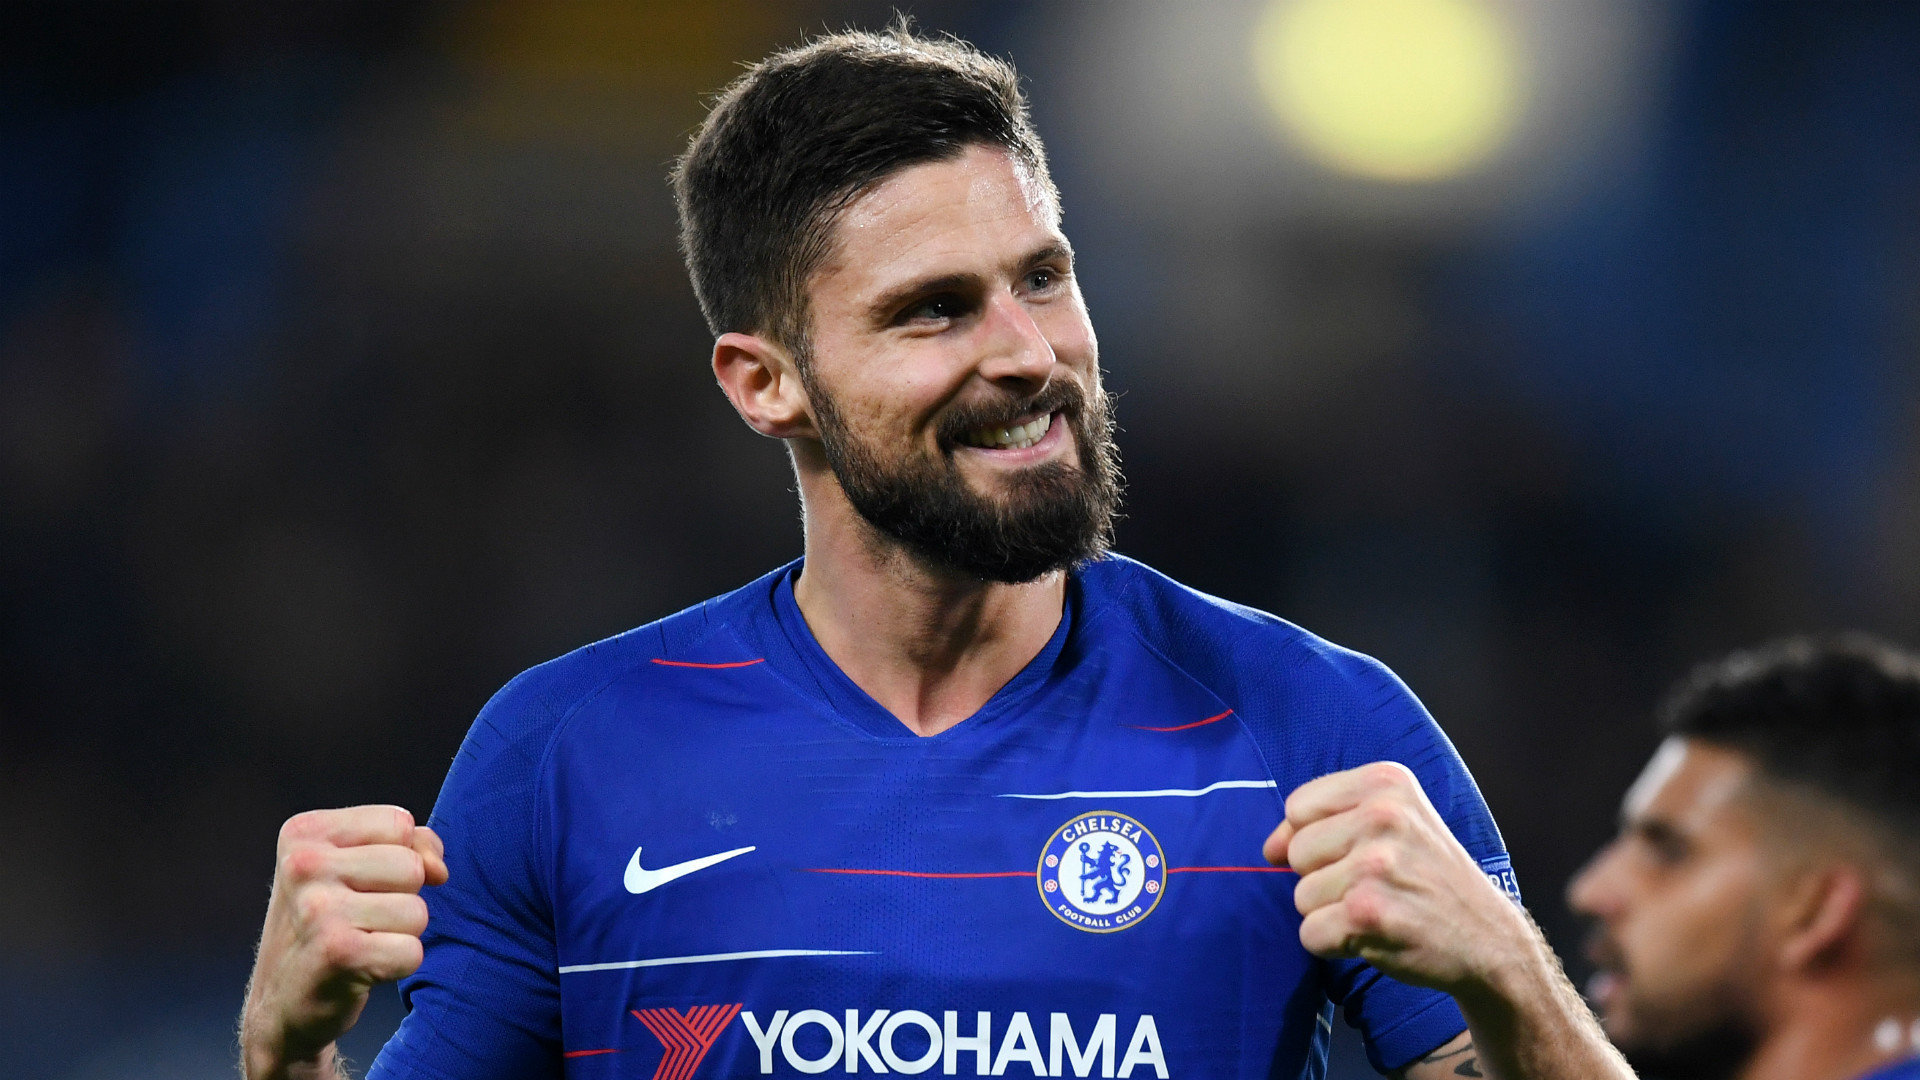 'My blood is blue now' - Giroud won't hold back against Arsenal in the Europa League - Bóng Đá